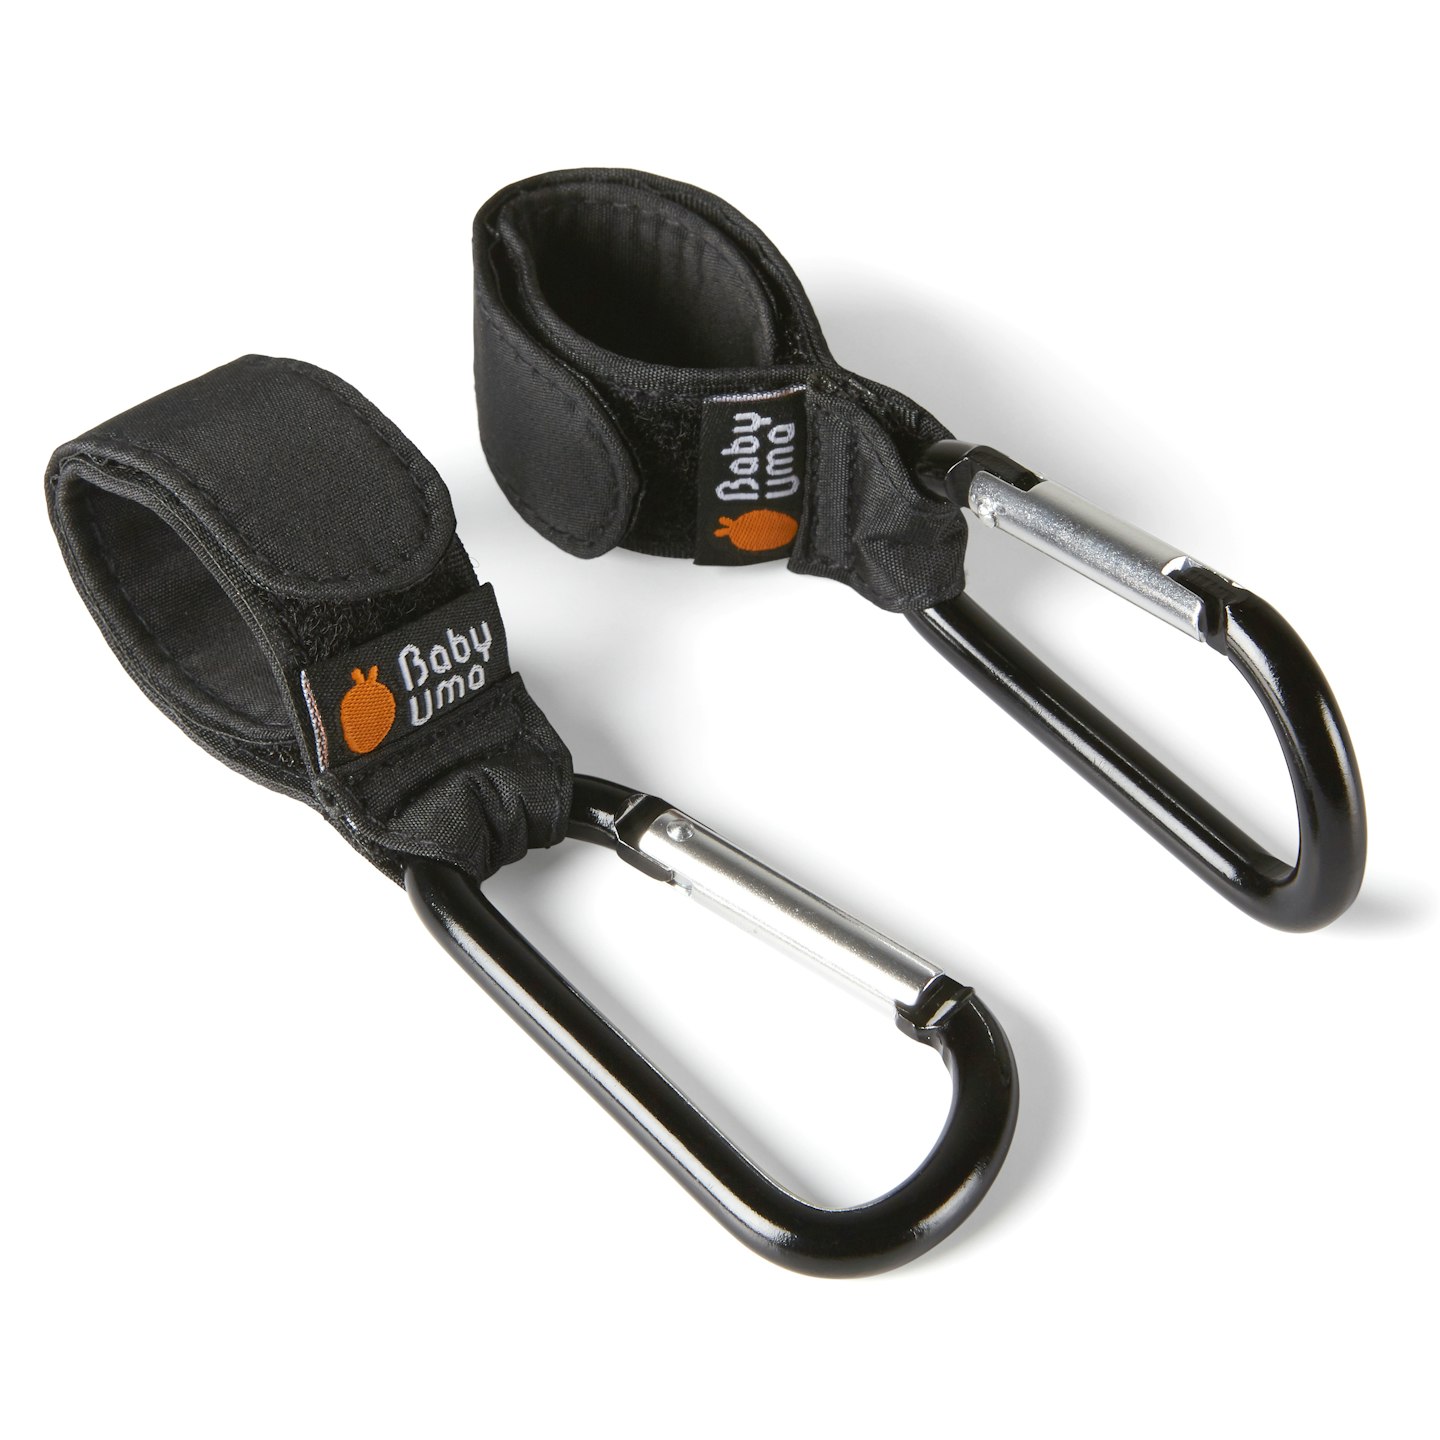 Baby Uma Buggy Clips (2 Pack) review